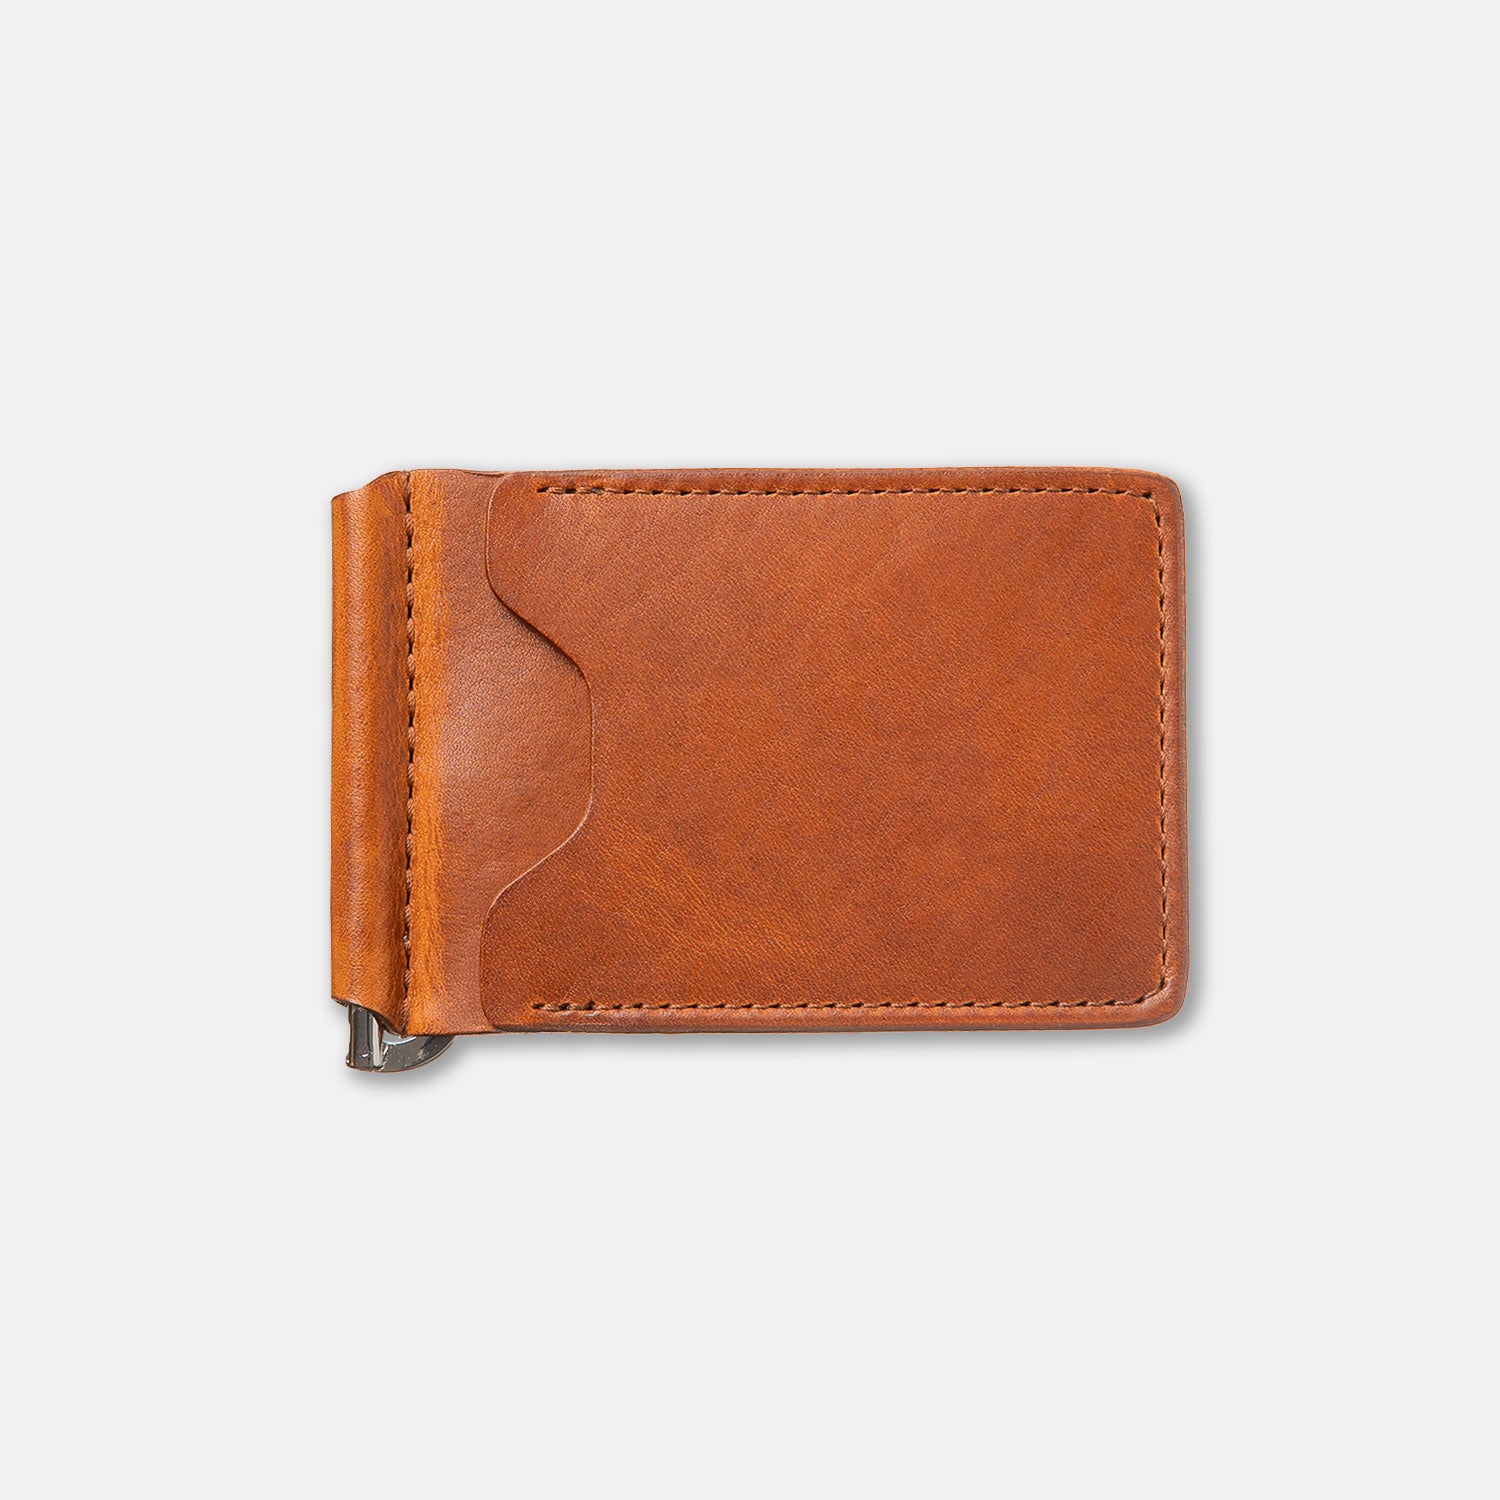 Premium Colombian Handmade Leather Goods Guaranteed For Life – LAND Leather  Goods